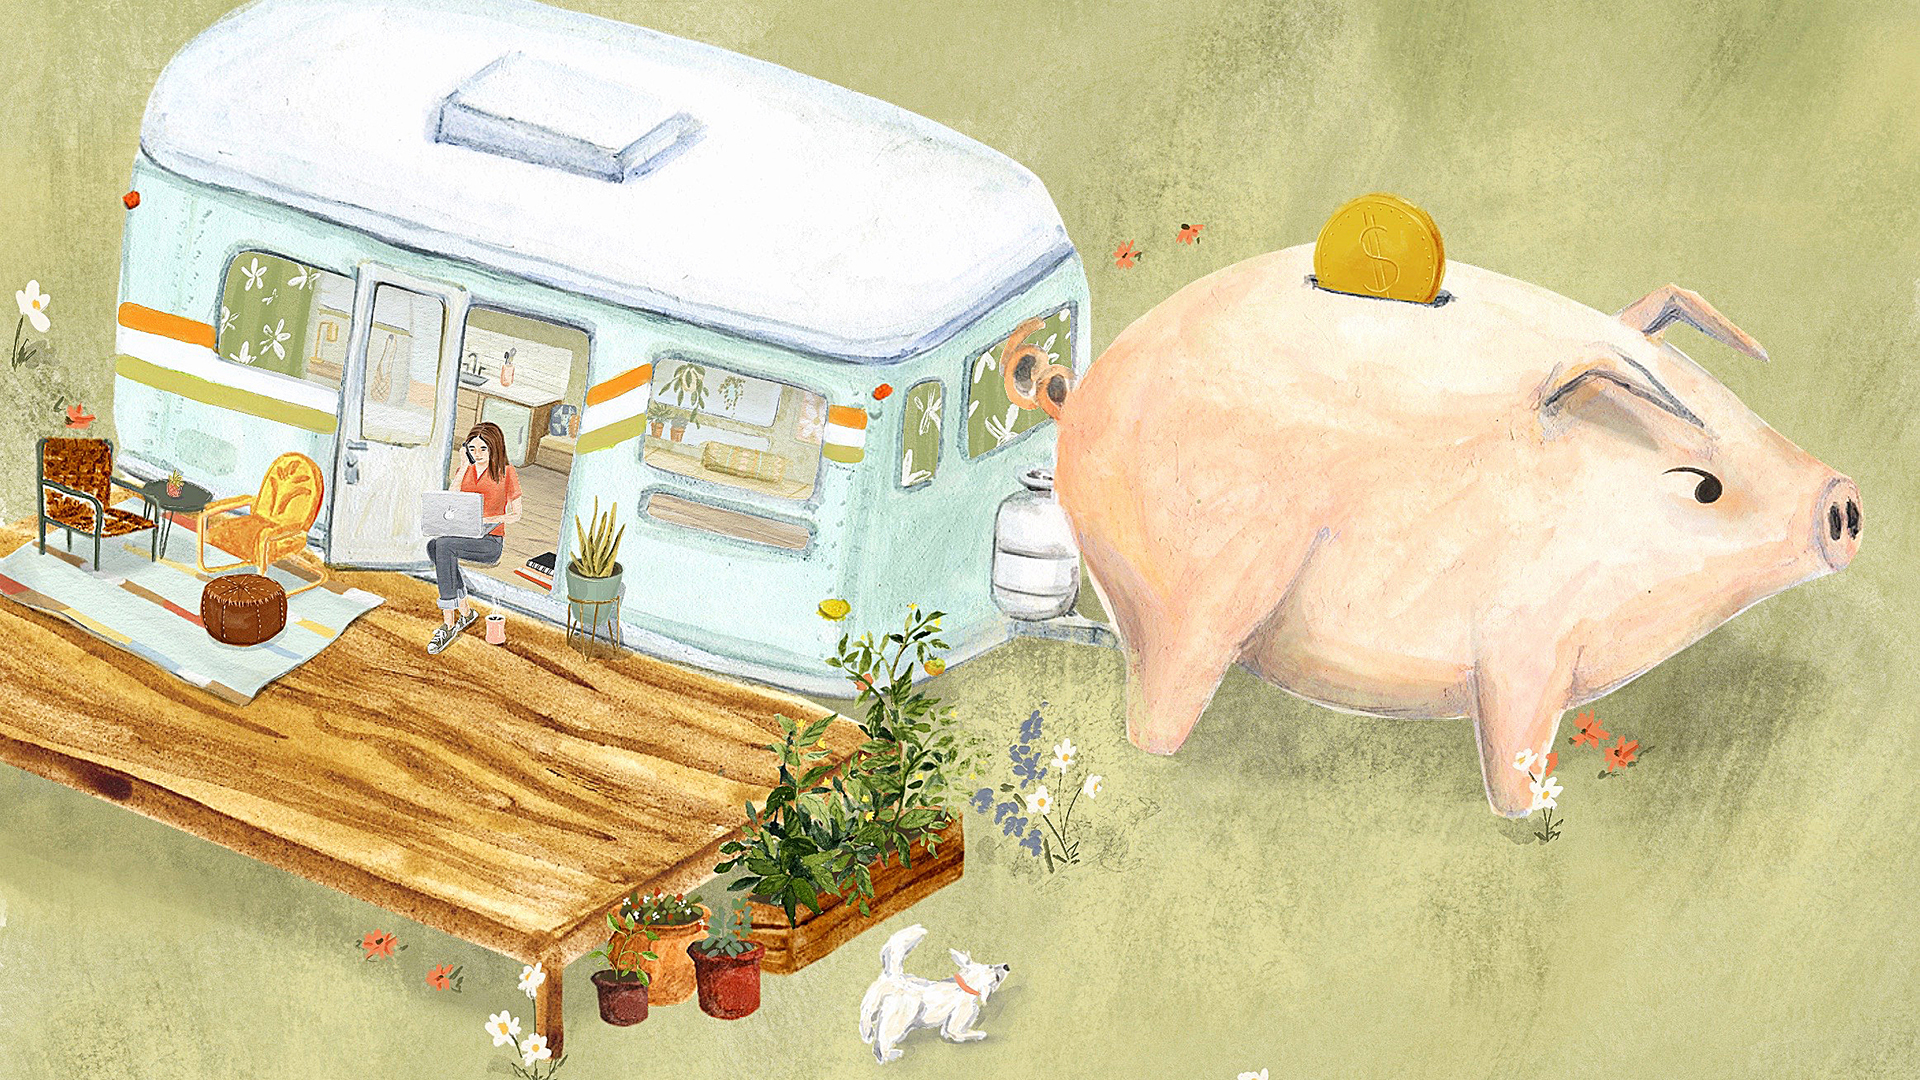 A playful illustration of a pink piggybank pulling an airstream trailer